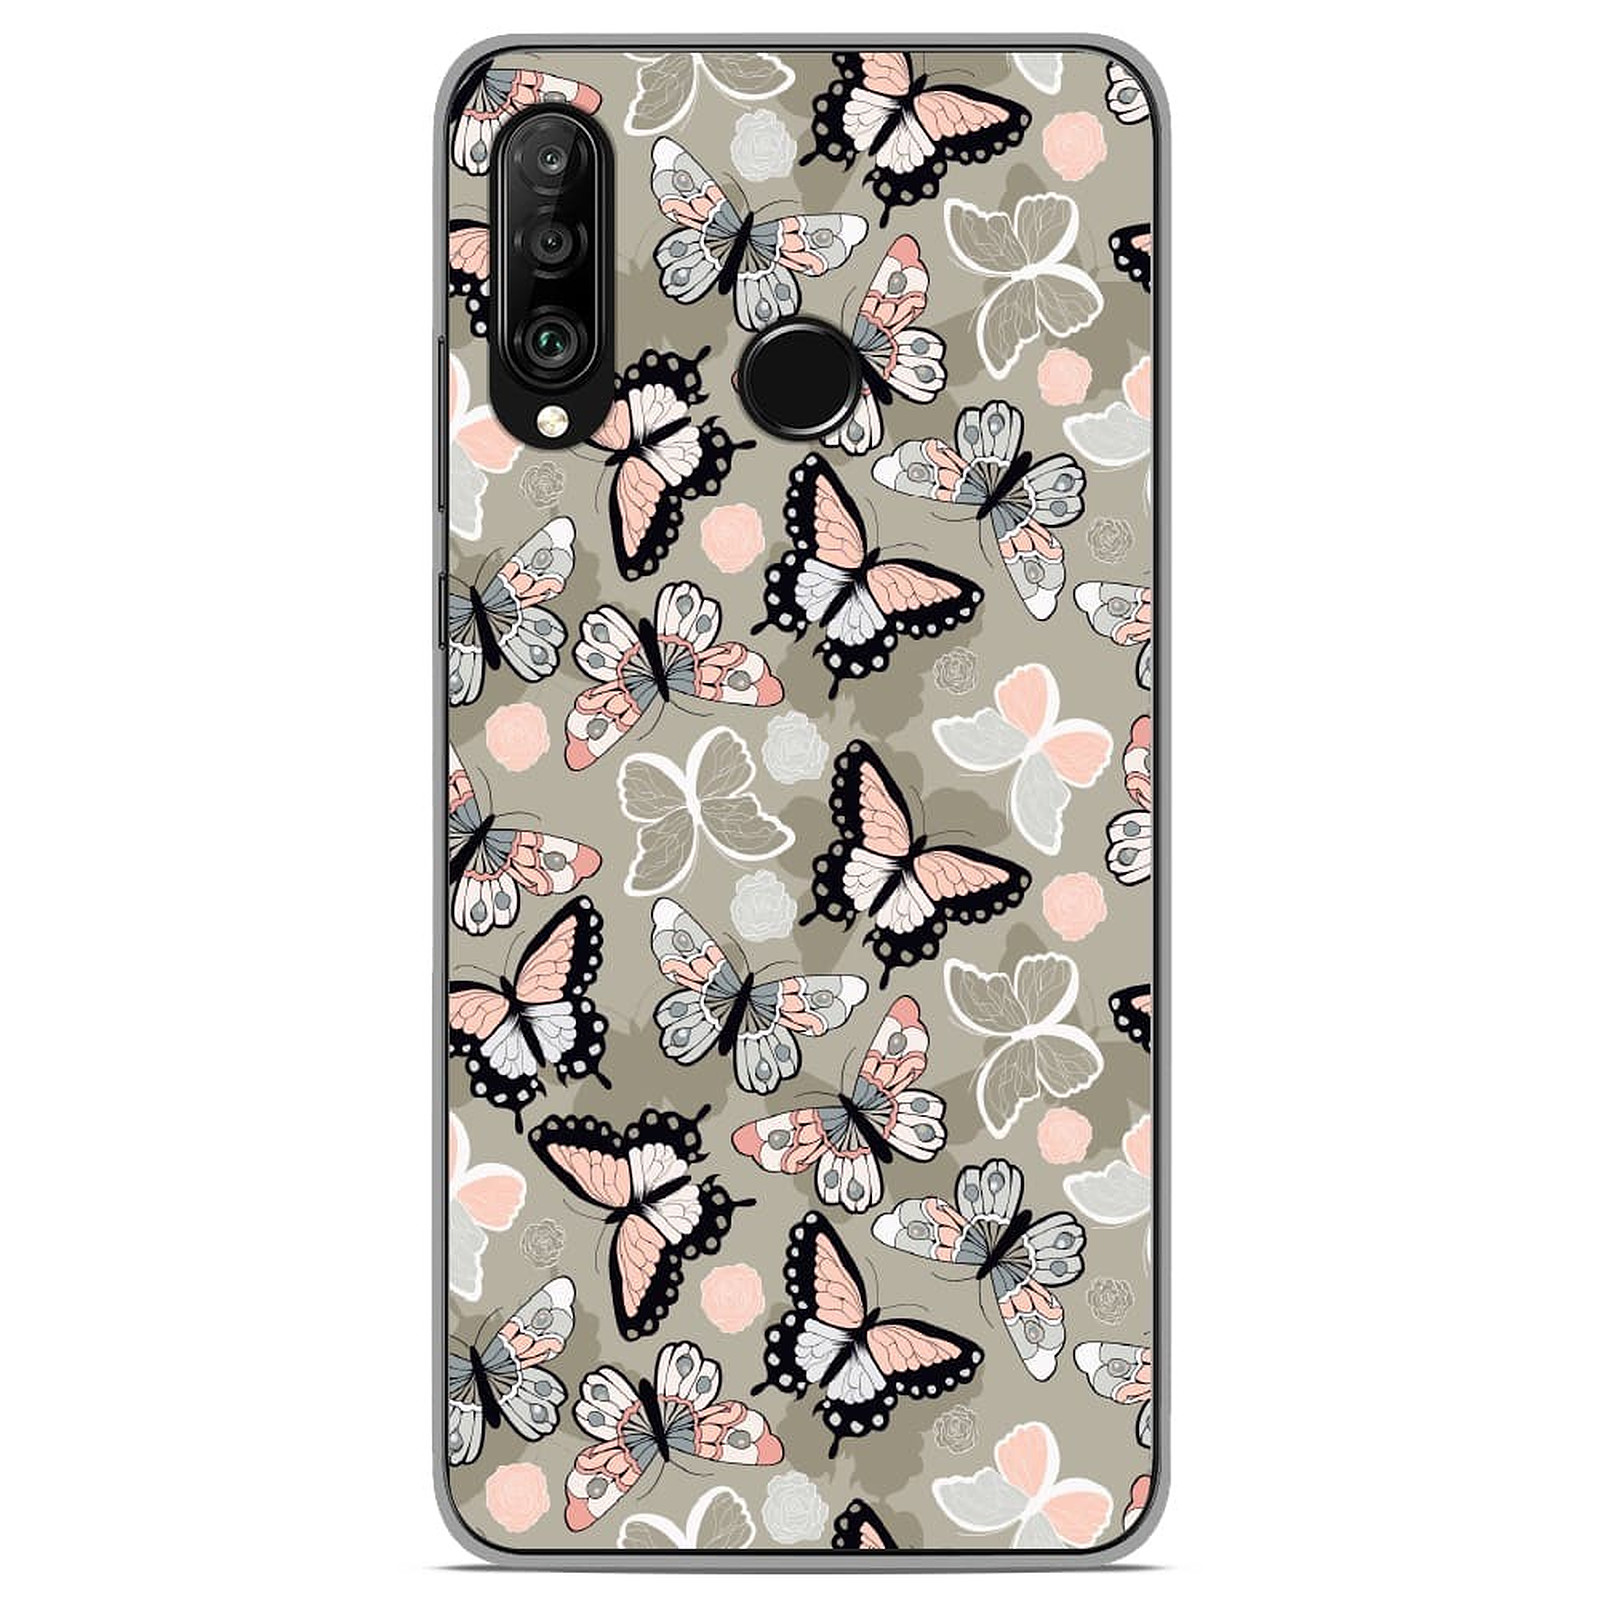 1001 Coques Coque silicone gel Huawei P30 Lite motif Papillons Vintage - Coque telephone 1001Coques